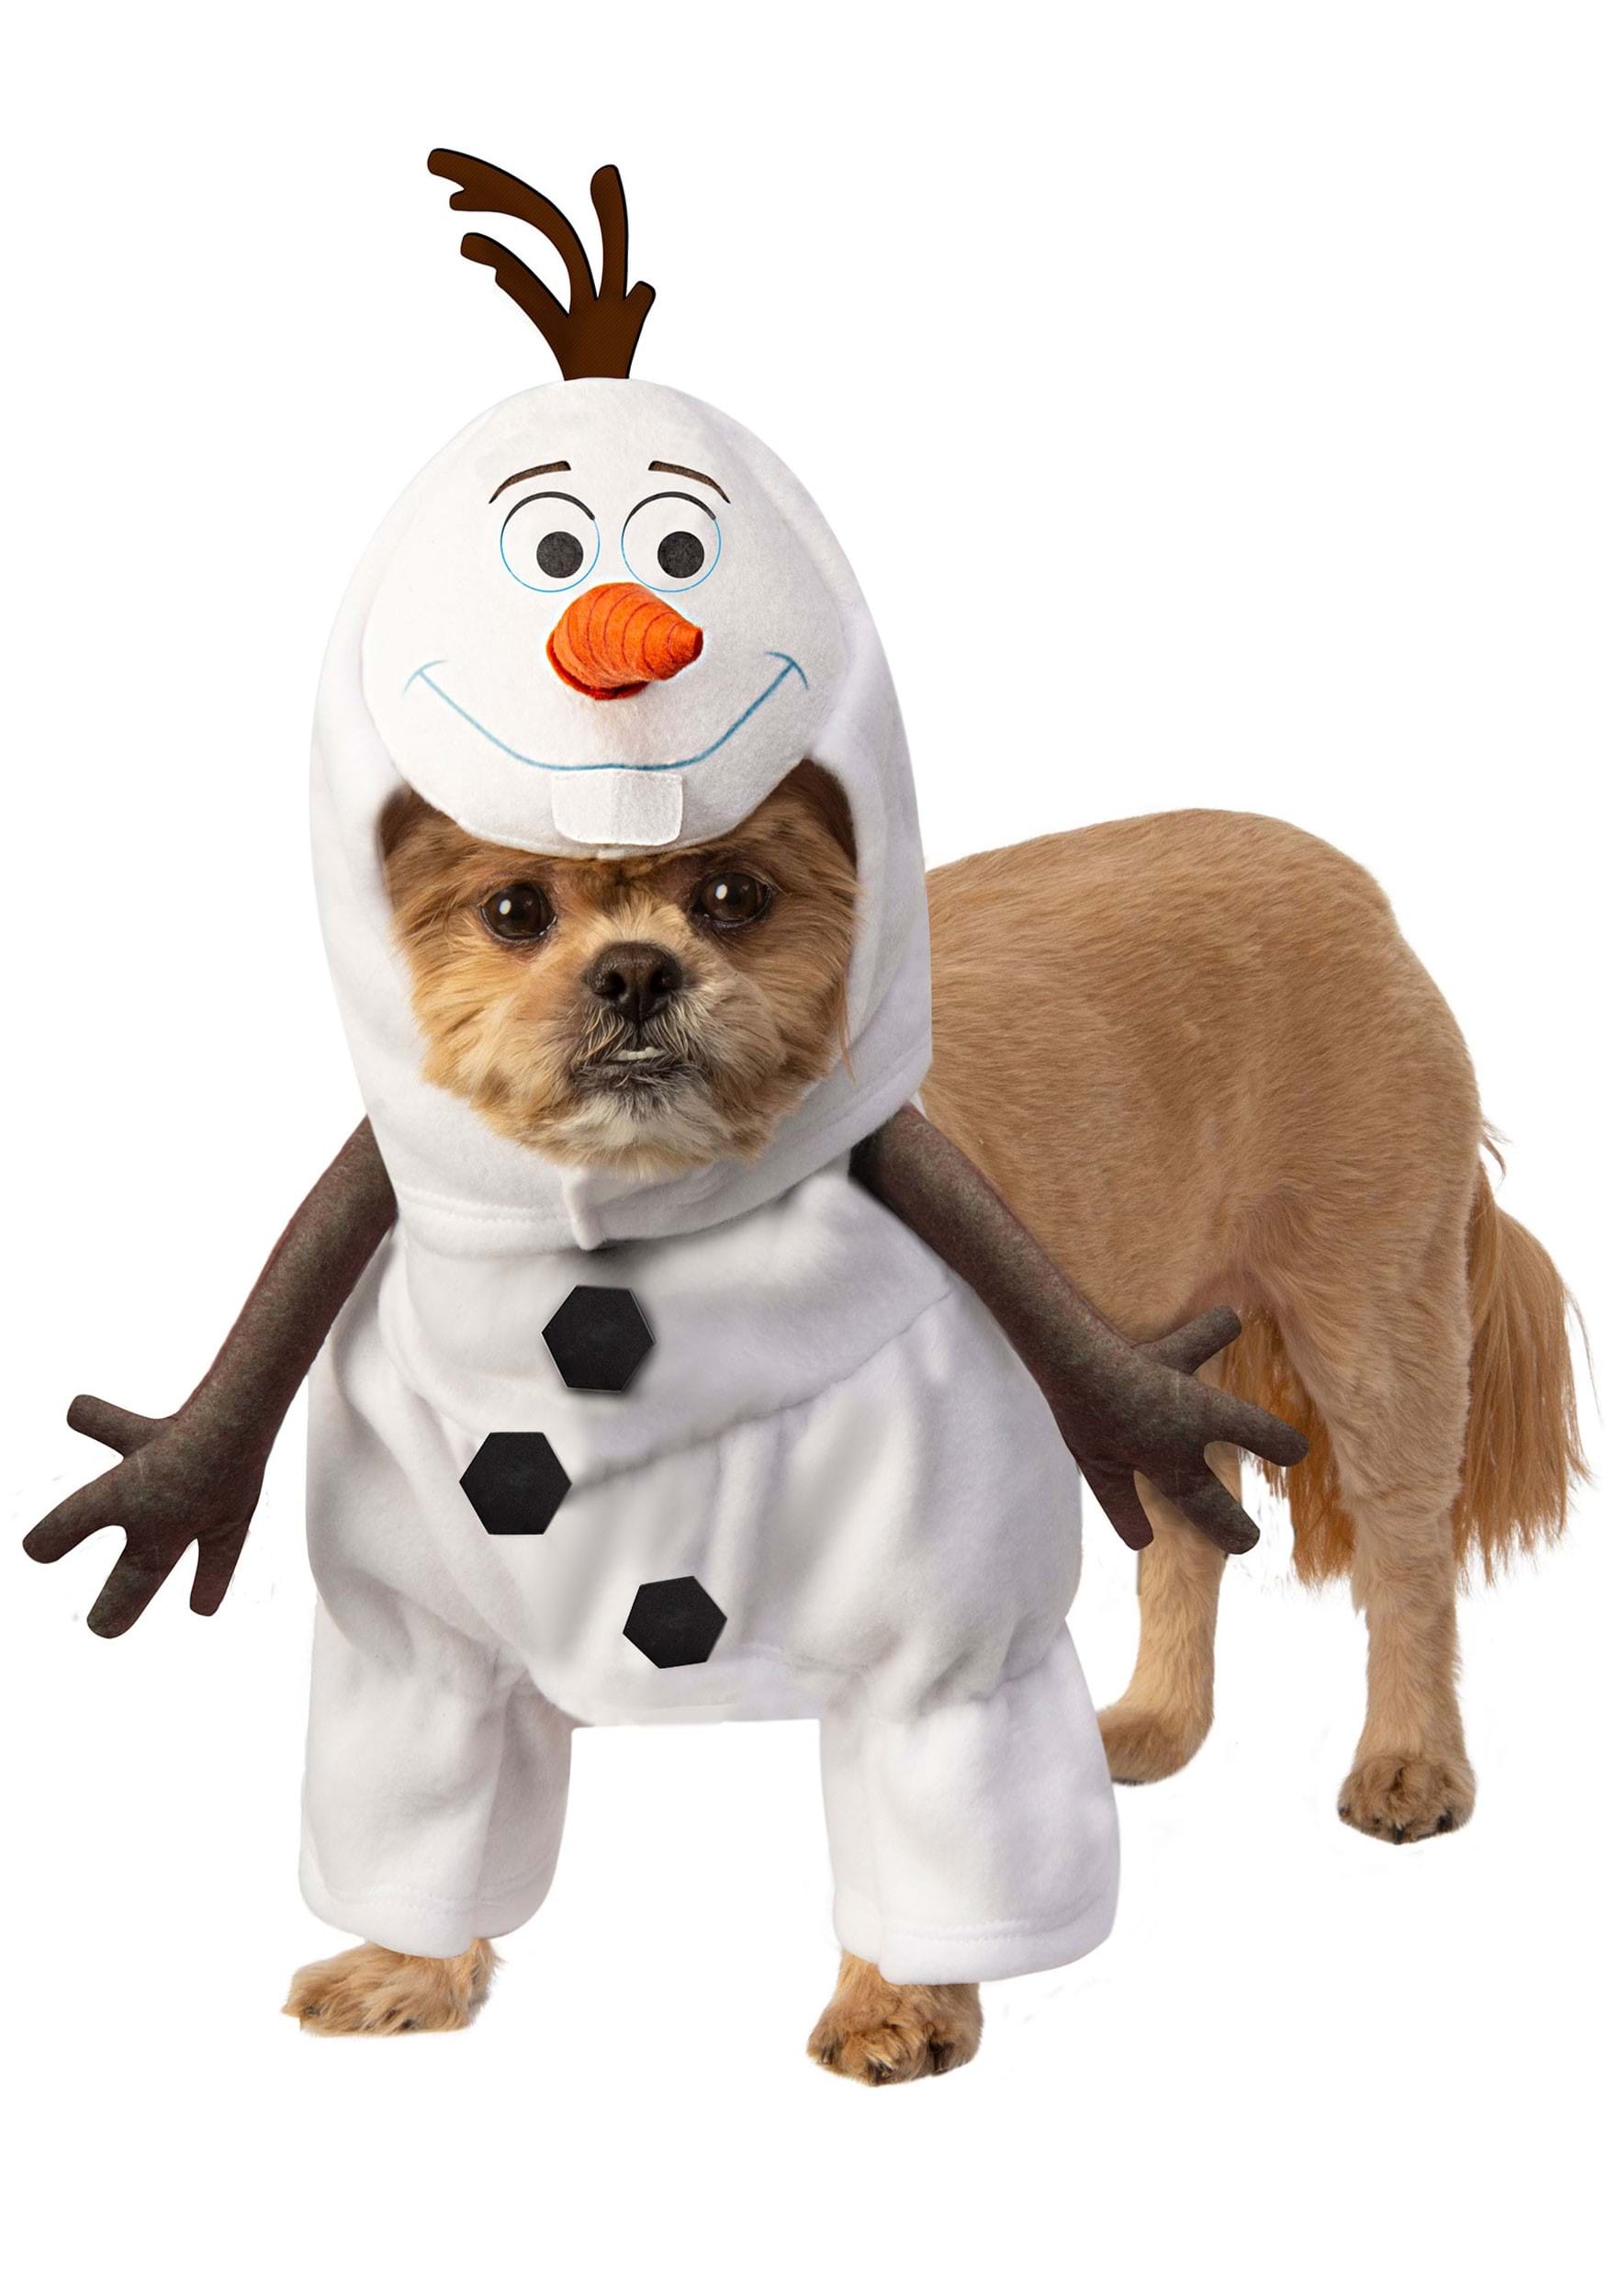 Frozen Olaf Costume for Dogs